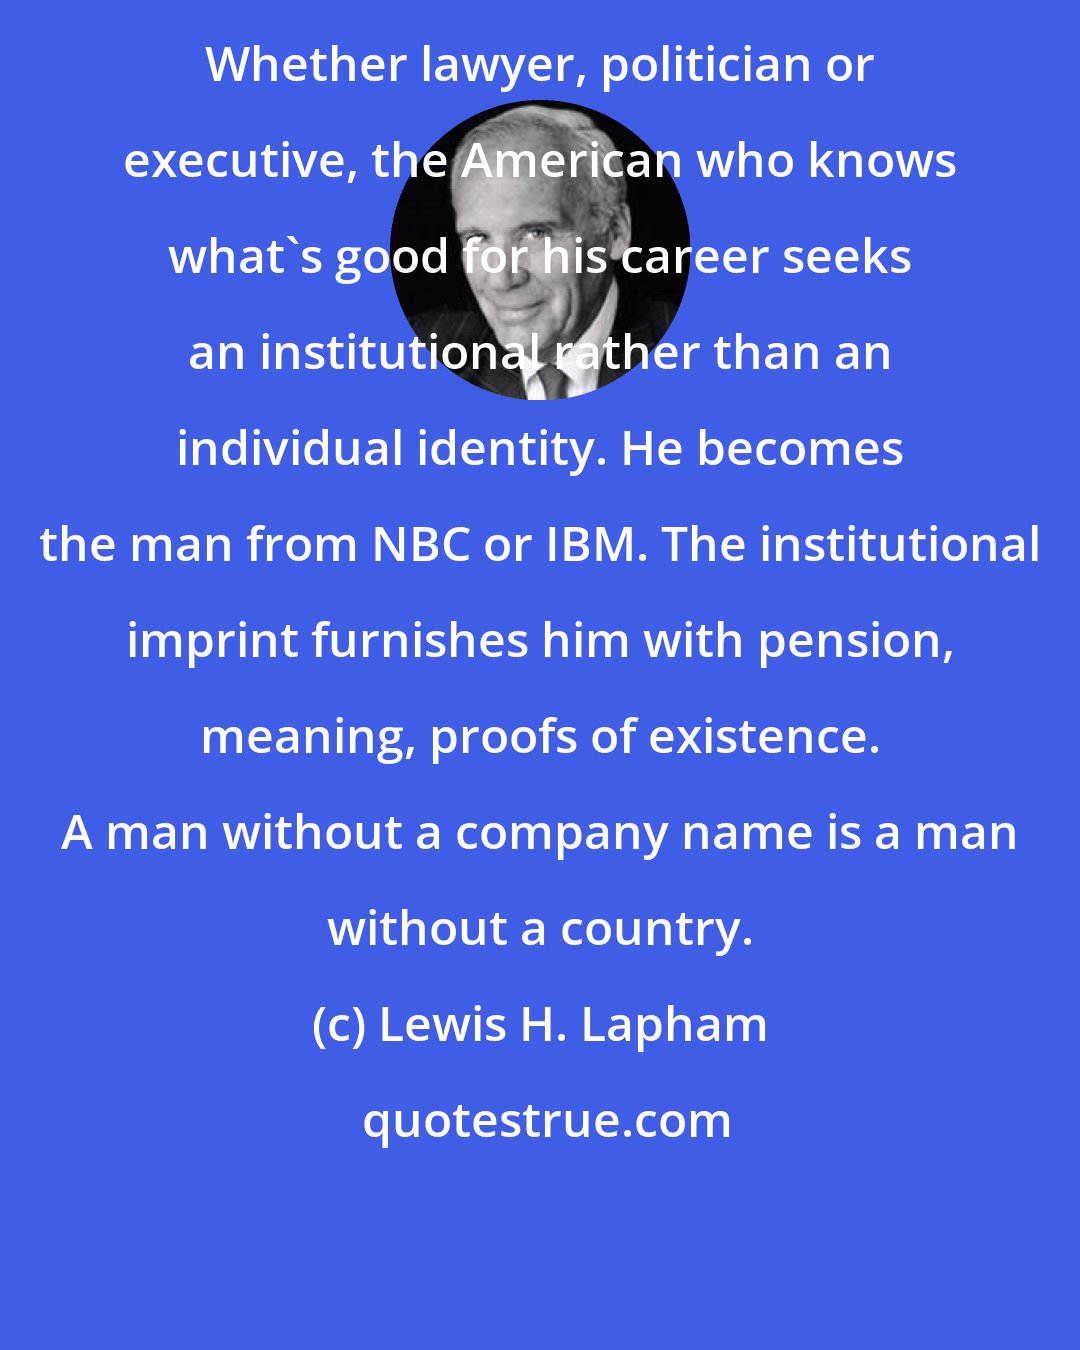 Lewis H. Lapham: Whether lawyer, politician or executive, the American who knows what's good for his career seeks an institutional rather than an individual identity. He becomes the man from NBC or IBM. The institutional imprint furnishes him with pension, meaning, proofs of existence. A man without a company name is a man without a country.